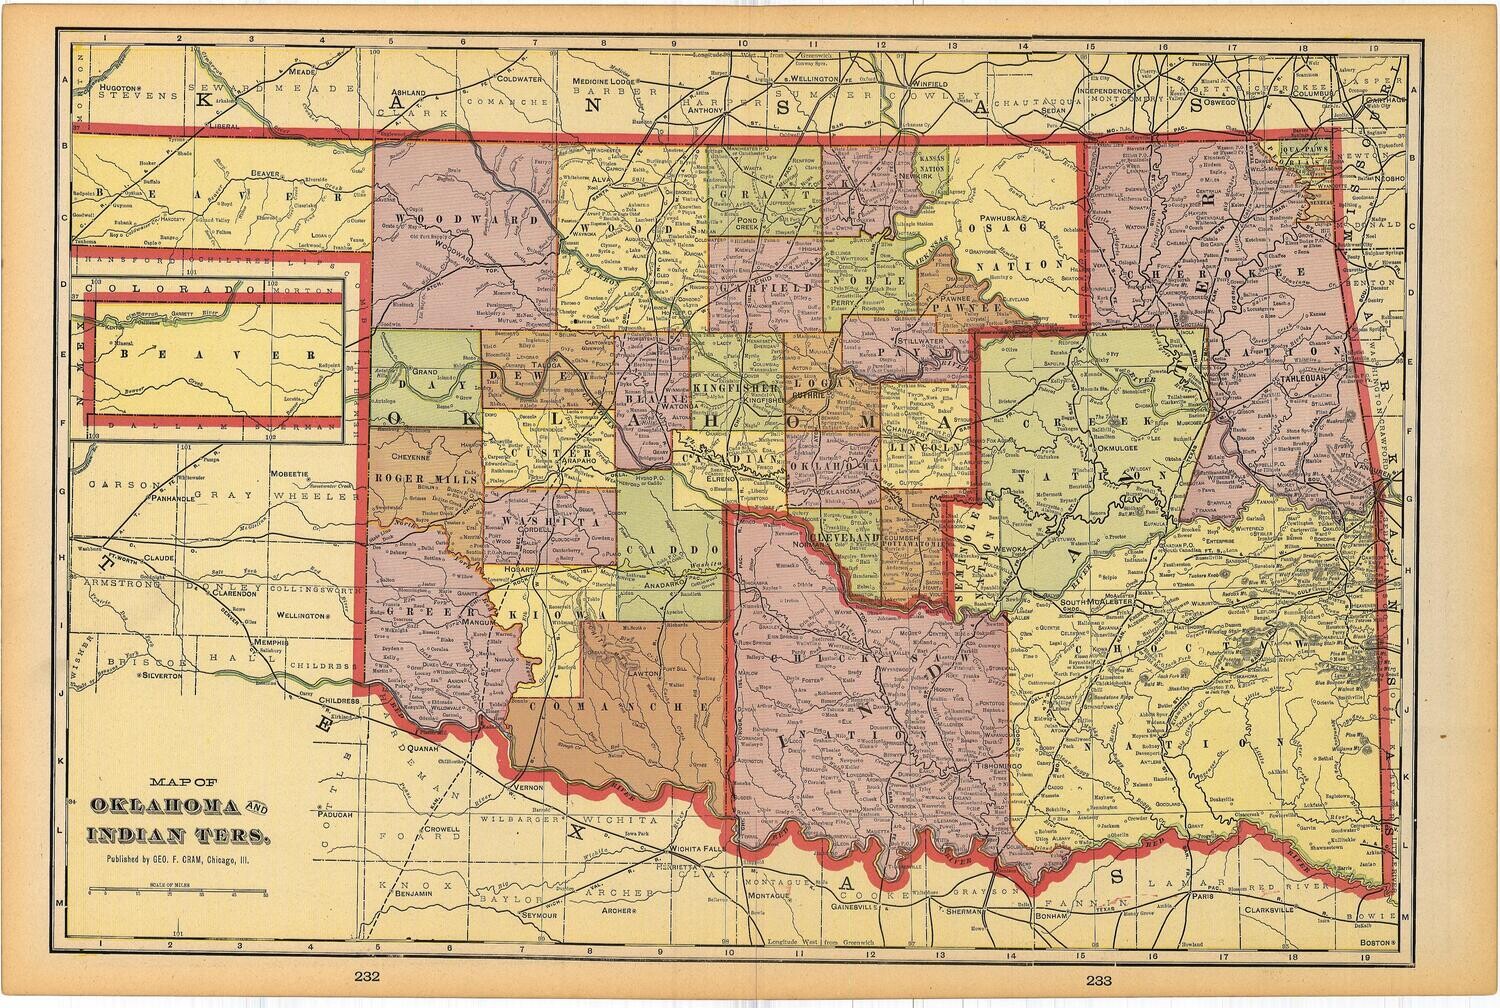 1911 Map of Oklahoma and Indian Territories by Geo.Cram in Color Lithography